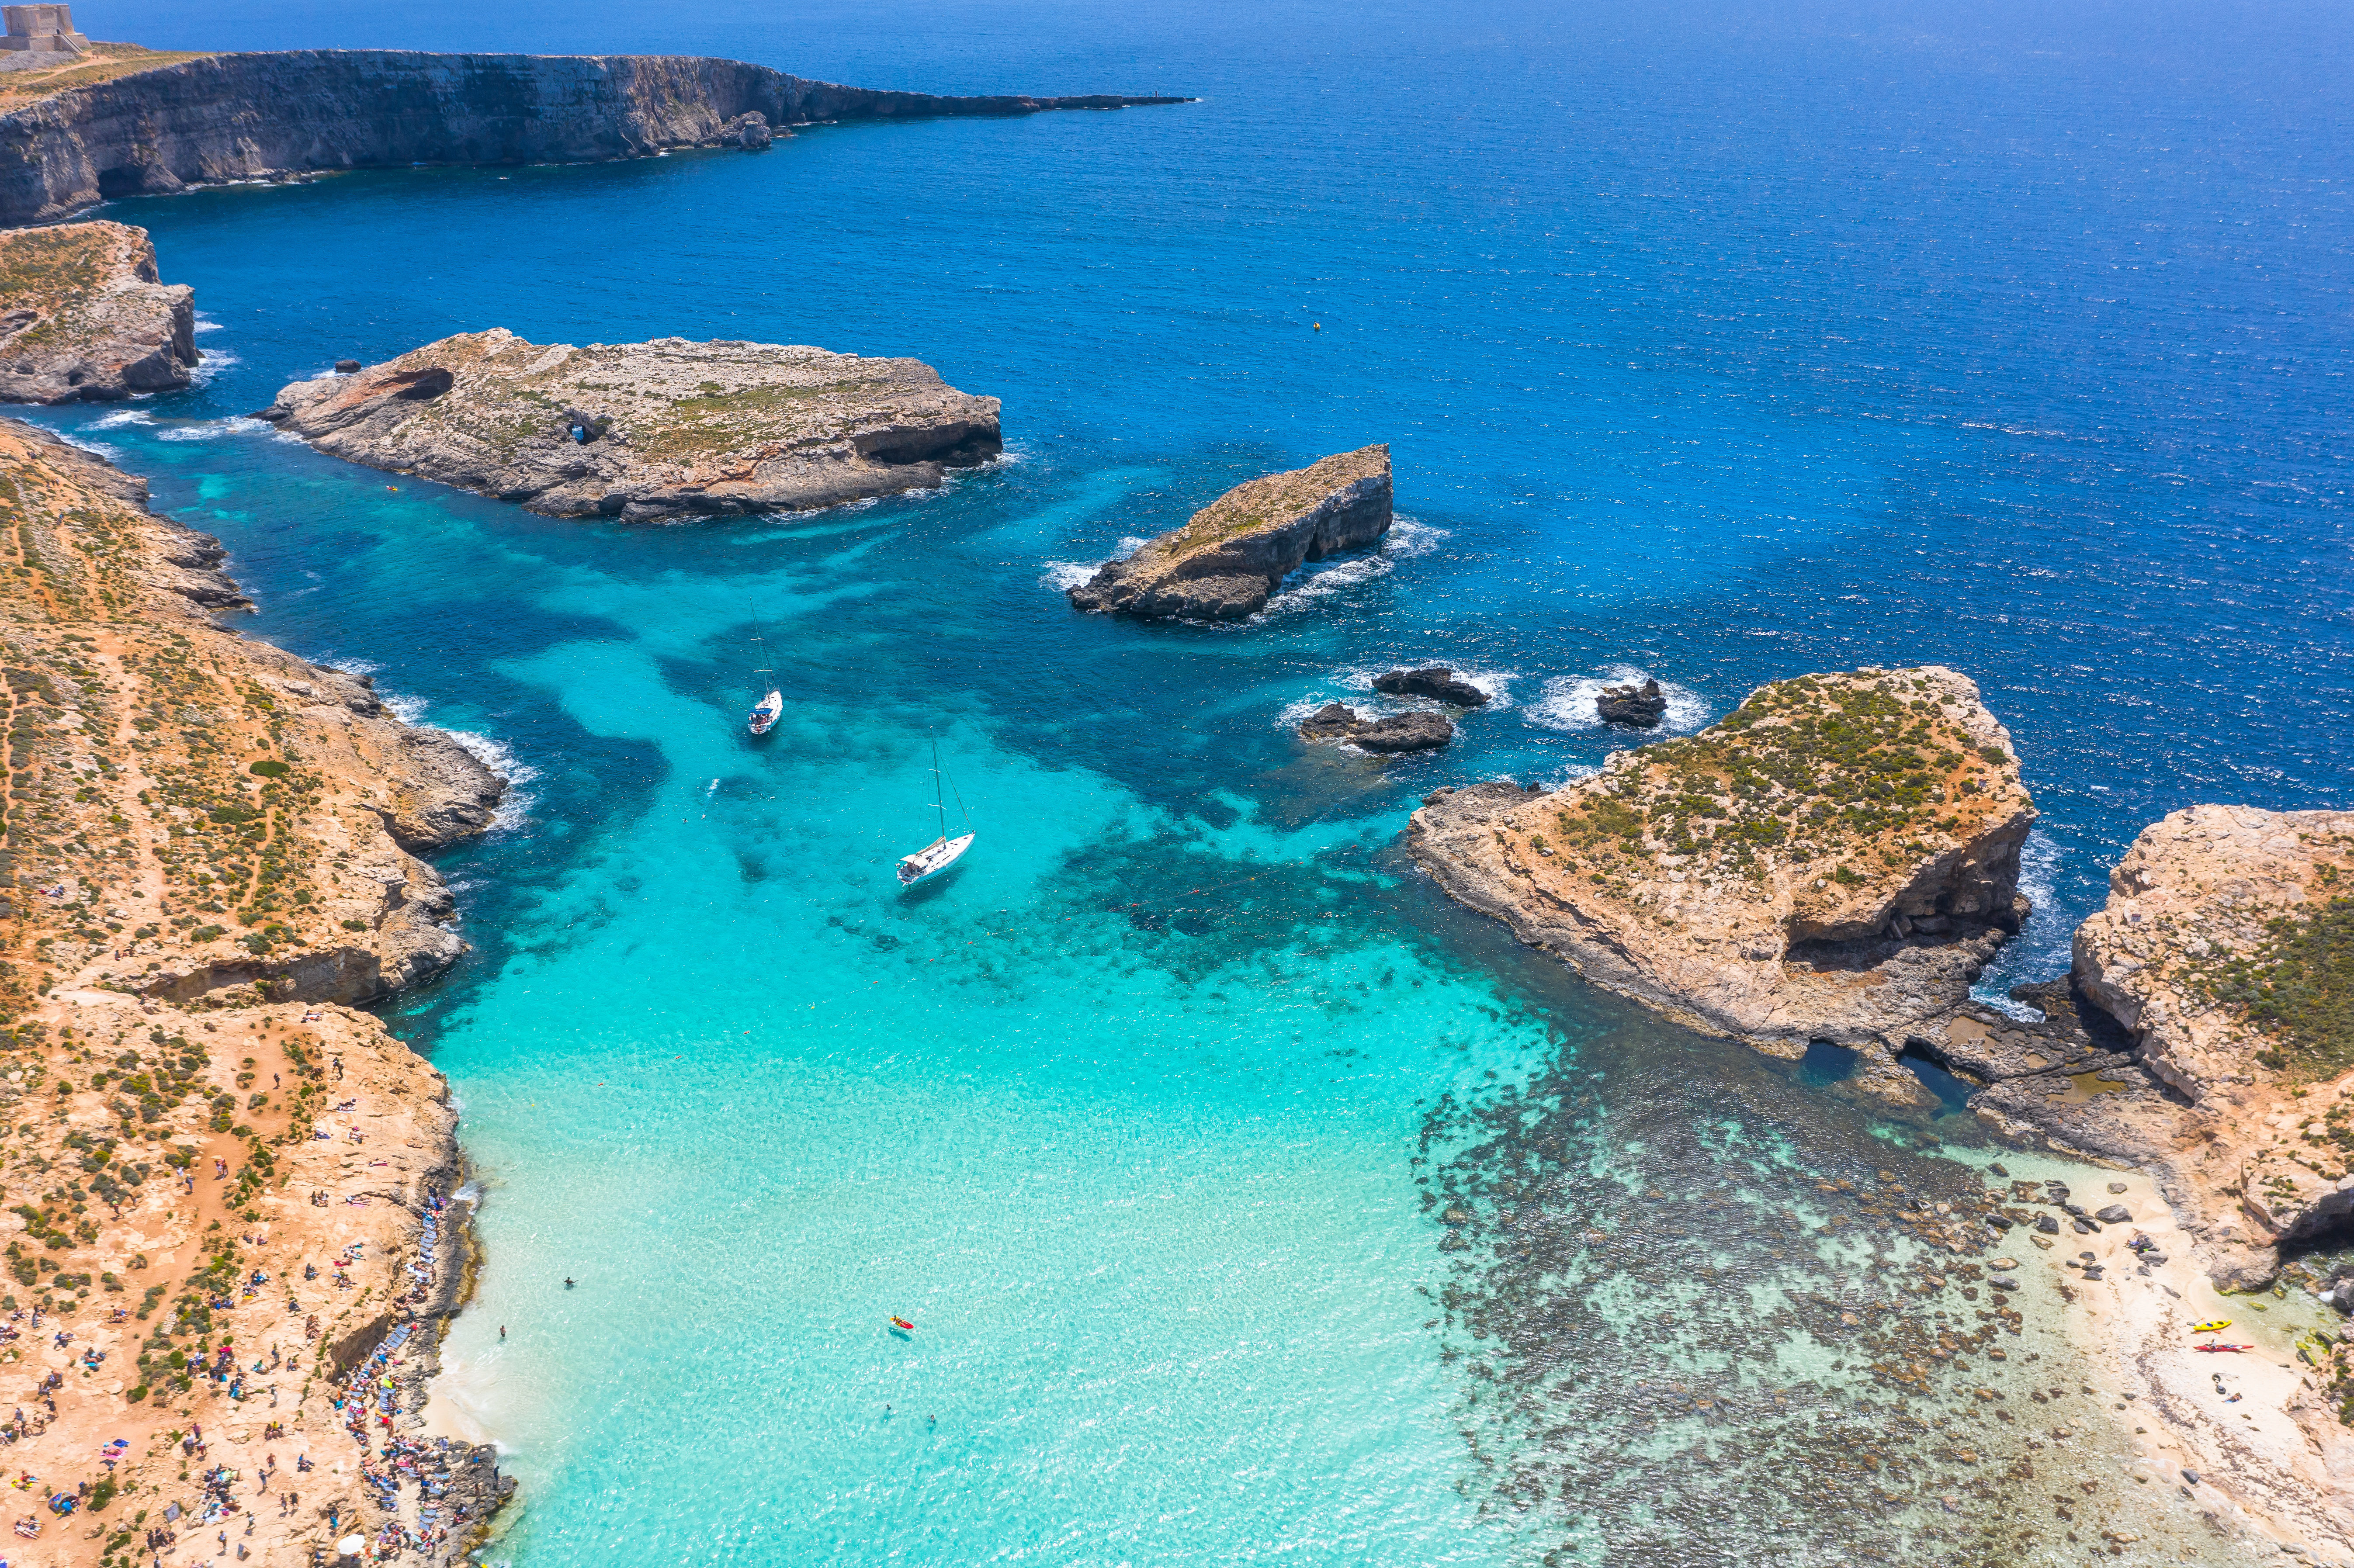 Aerial view of the clear turquoise waters and rocky outcrops of Blue Lagoon on Comino Island in Malta